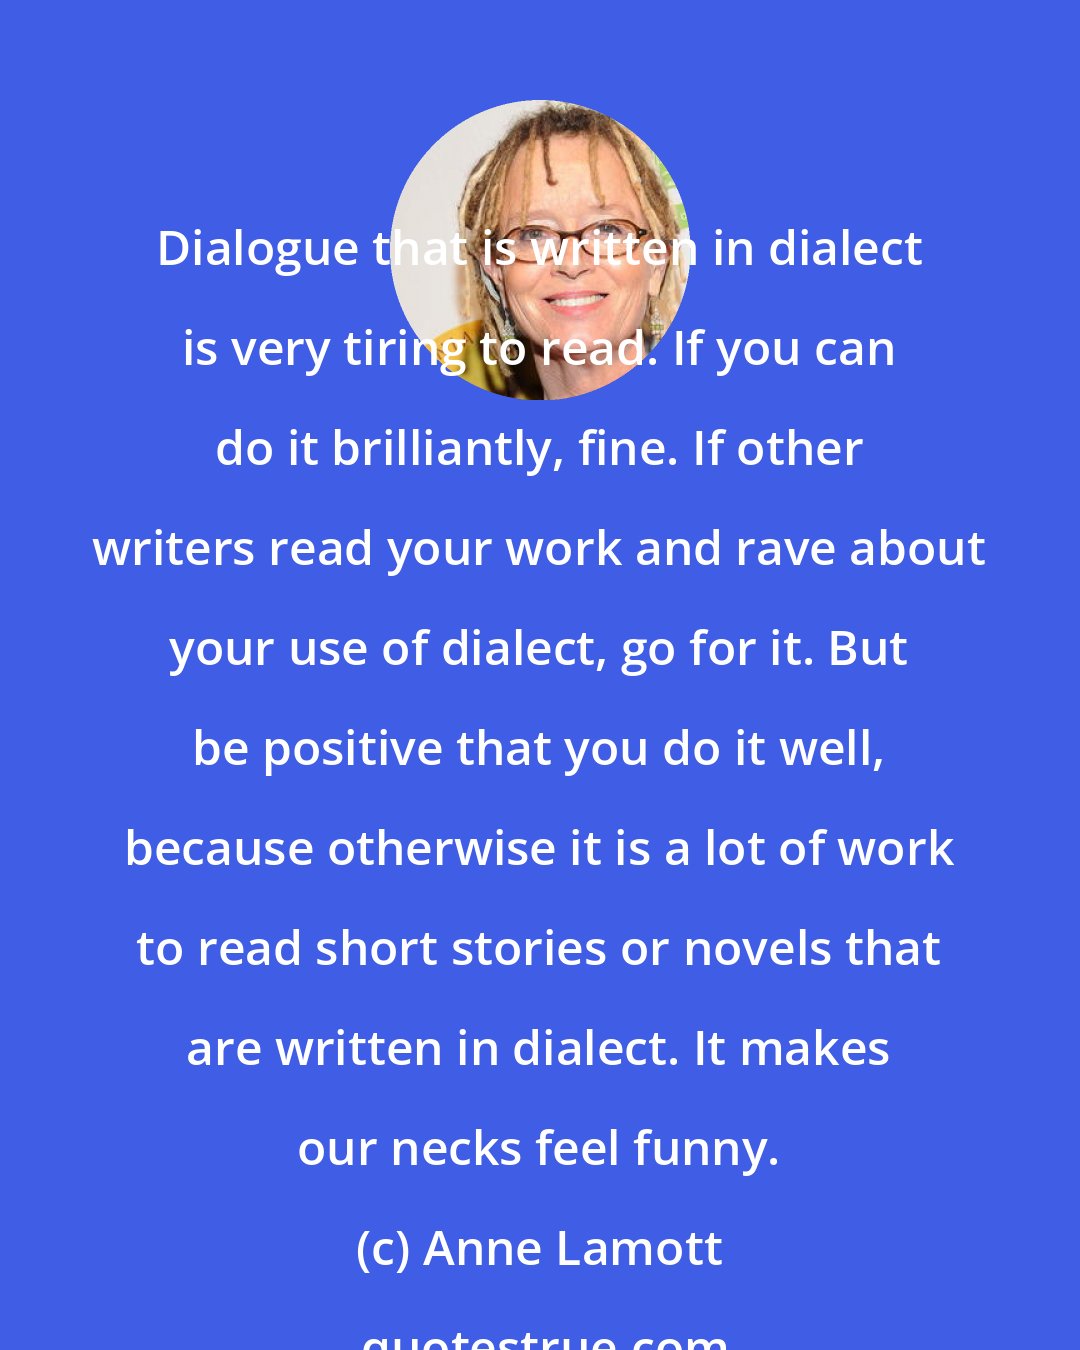 Anne Lamott: Dialogue that is written in dialect is very tiring to read. If you can do it brilliantly, fine. If other writers read your work and rave about your use of dialect, go for it. But be positive that you do it well, because otherwise it is a lot of work to read short stories or novels that are written in dialect. It makes our necks feel funny.